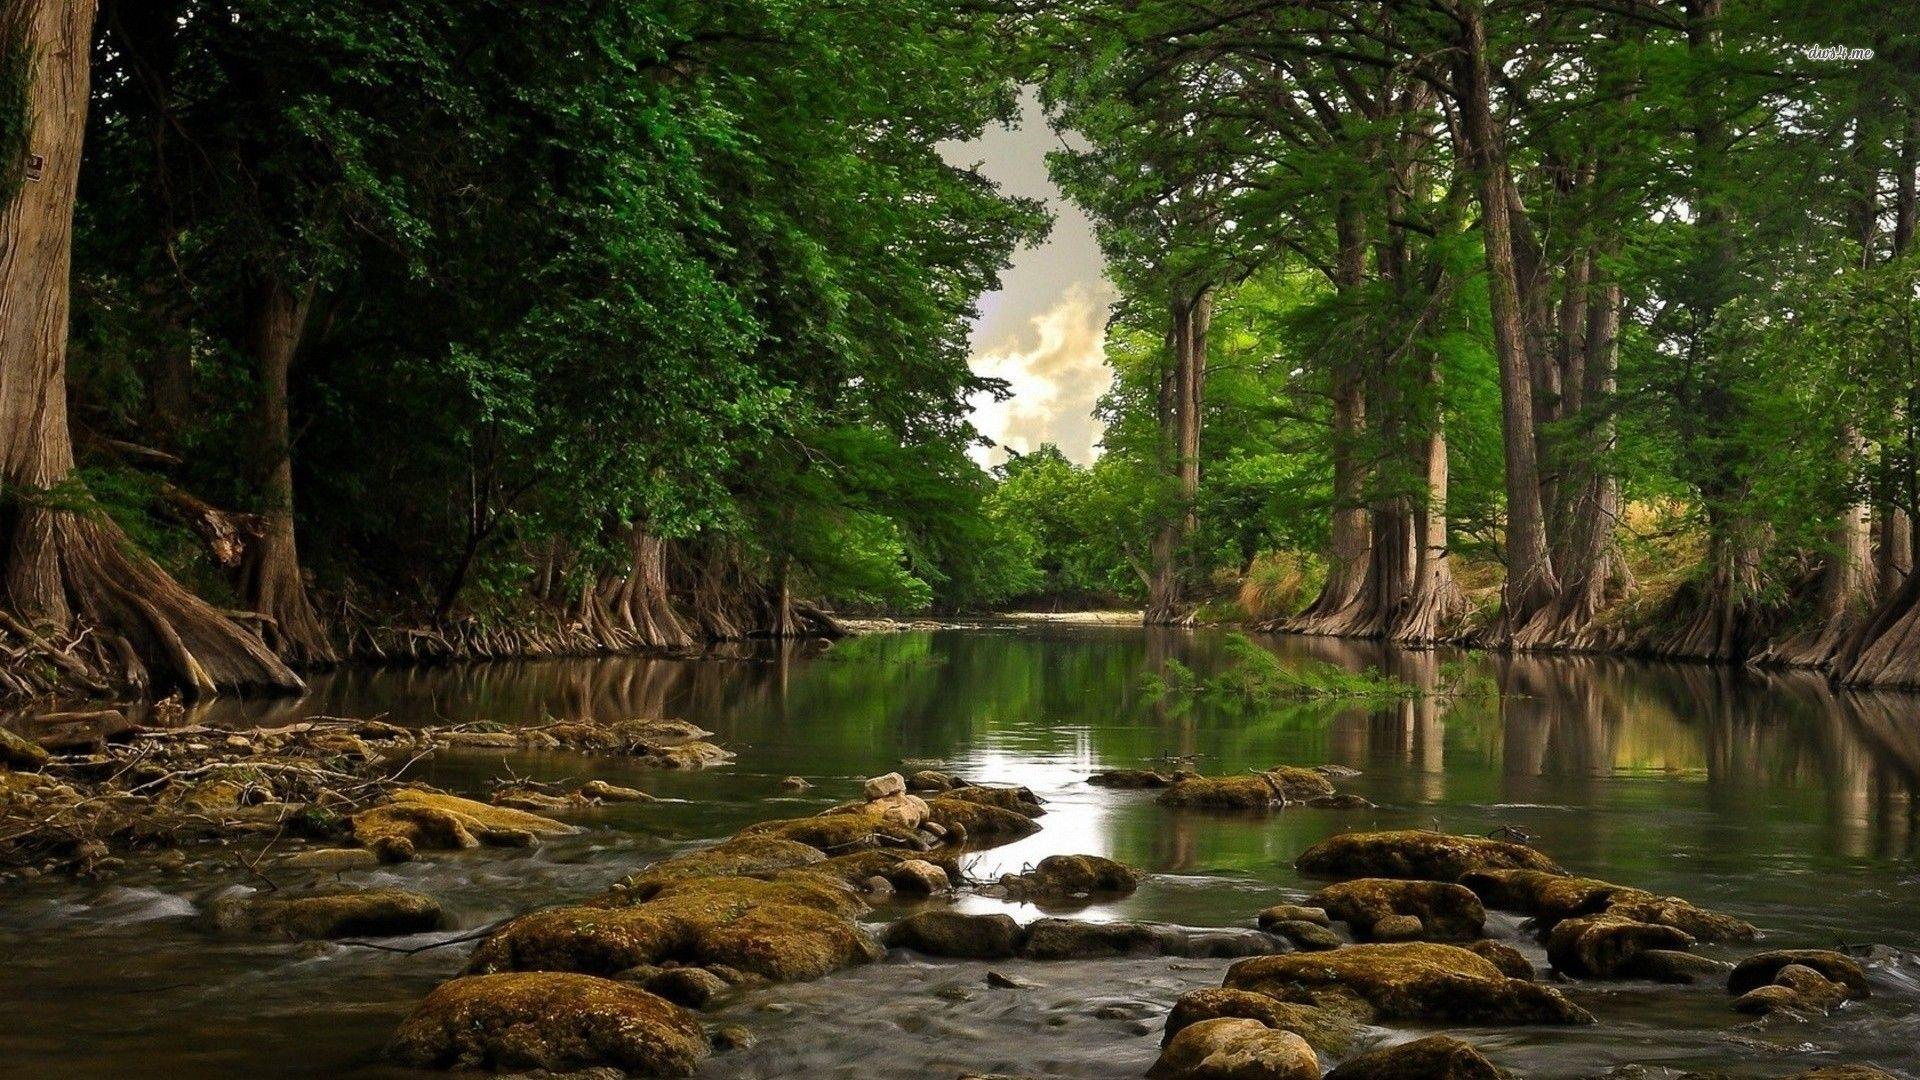 Forest River Wallpaper Photo #ysp  Forest photos, Forest wallpaper,  Background pictures